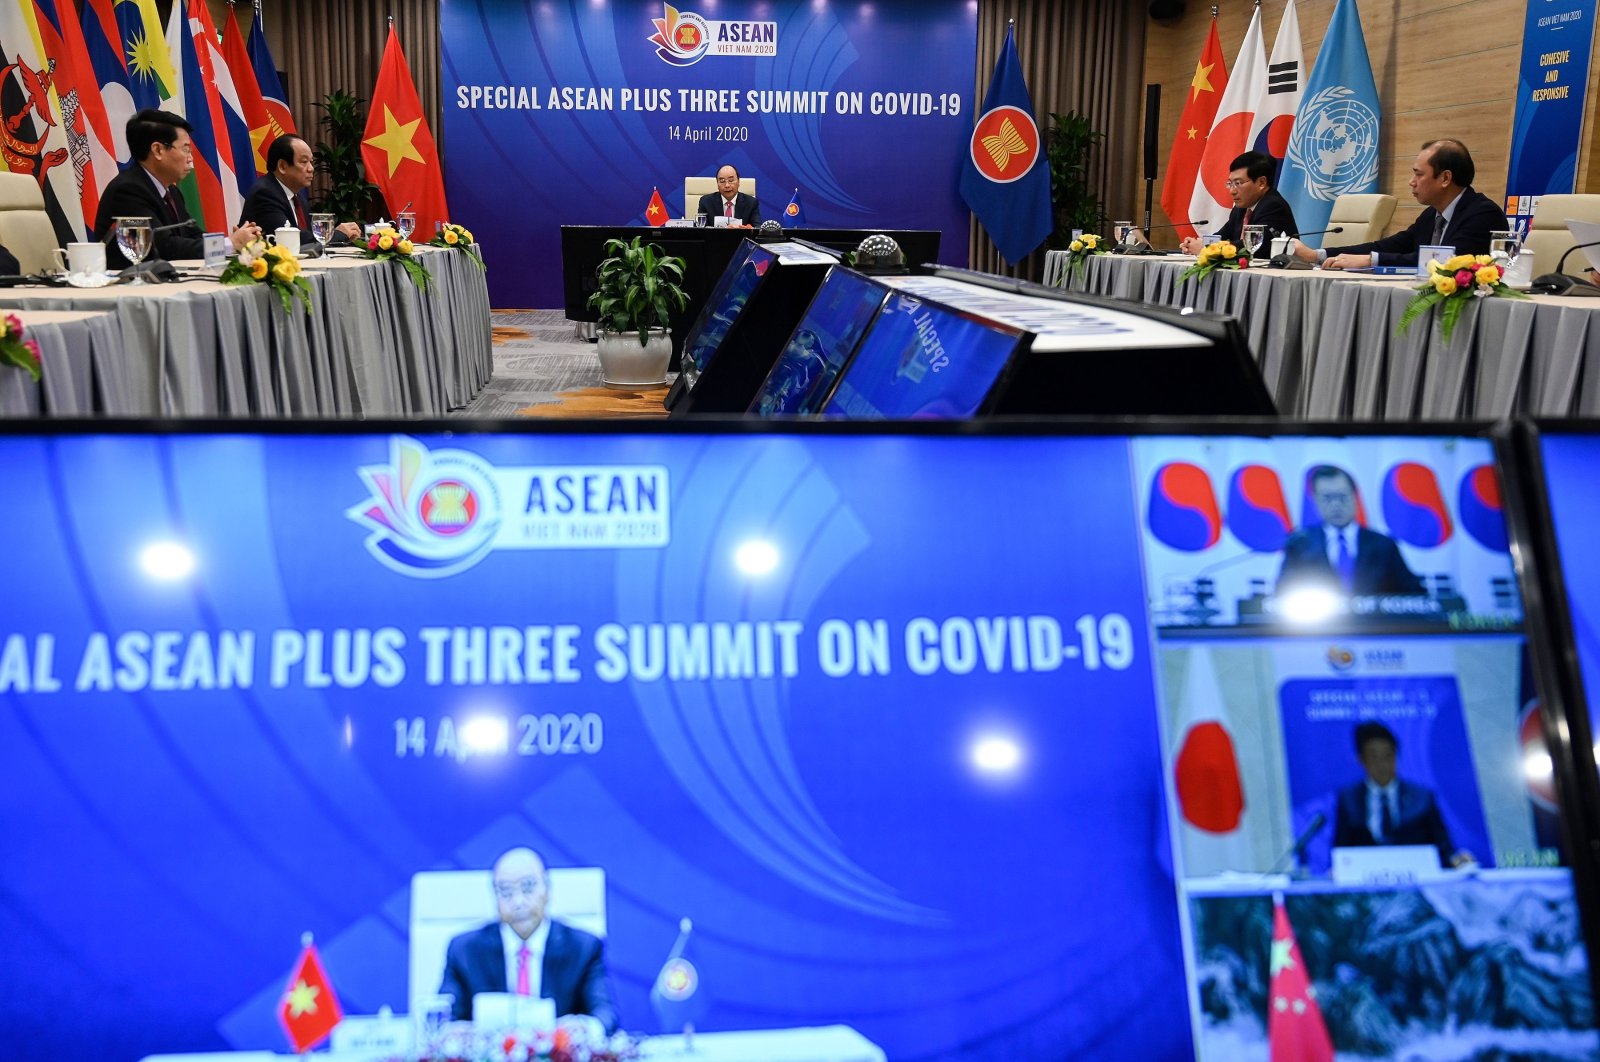 Vietnam’s Prime Minister Nguyen Xuan Phuc (C) addresses a live videoconference on the special Association of Southeast Asian Nations (ASEAN) Plus Three Summit on the coronavirus pandemic in Hanoi as South Korea's President Moon Jae-in, Japan's Prime Minister Shinzo Abe and China's Premier Li Keqiang are seen on television screen, April 14, 2020 . (AFP Photo)